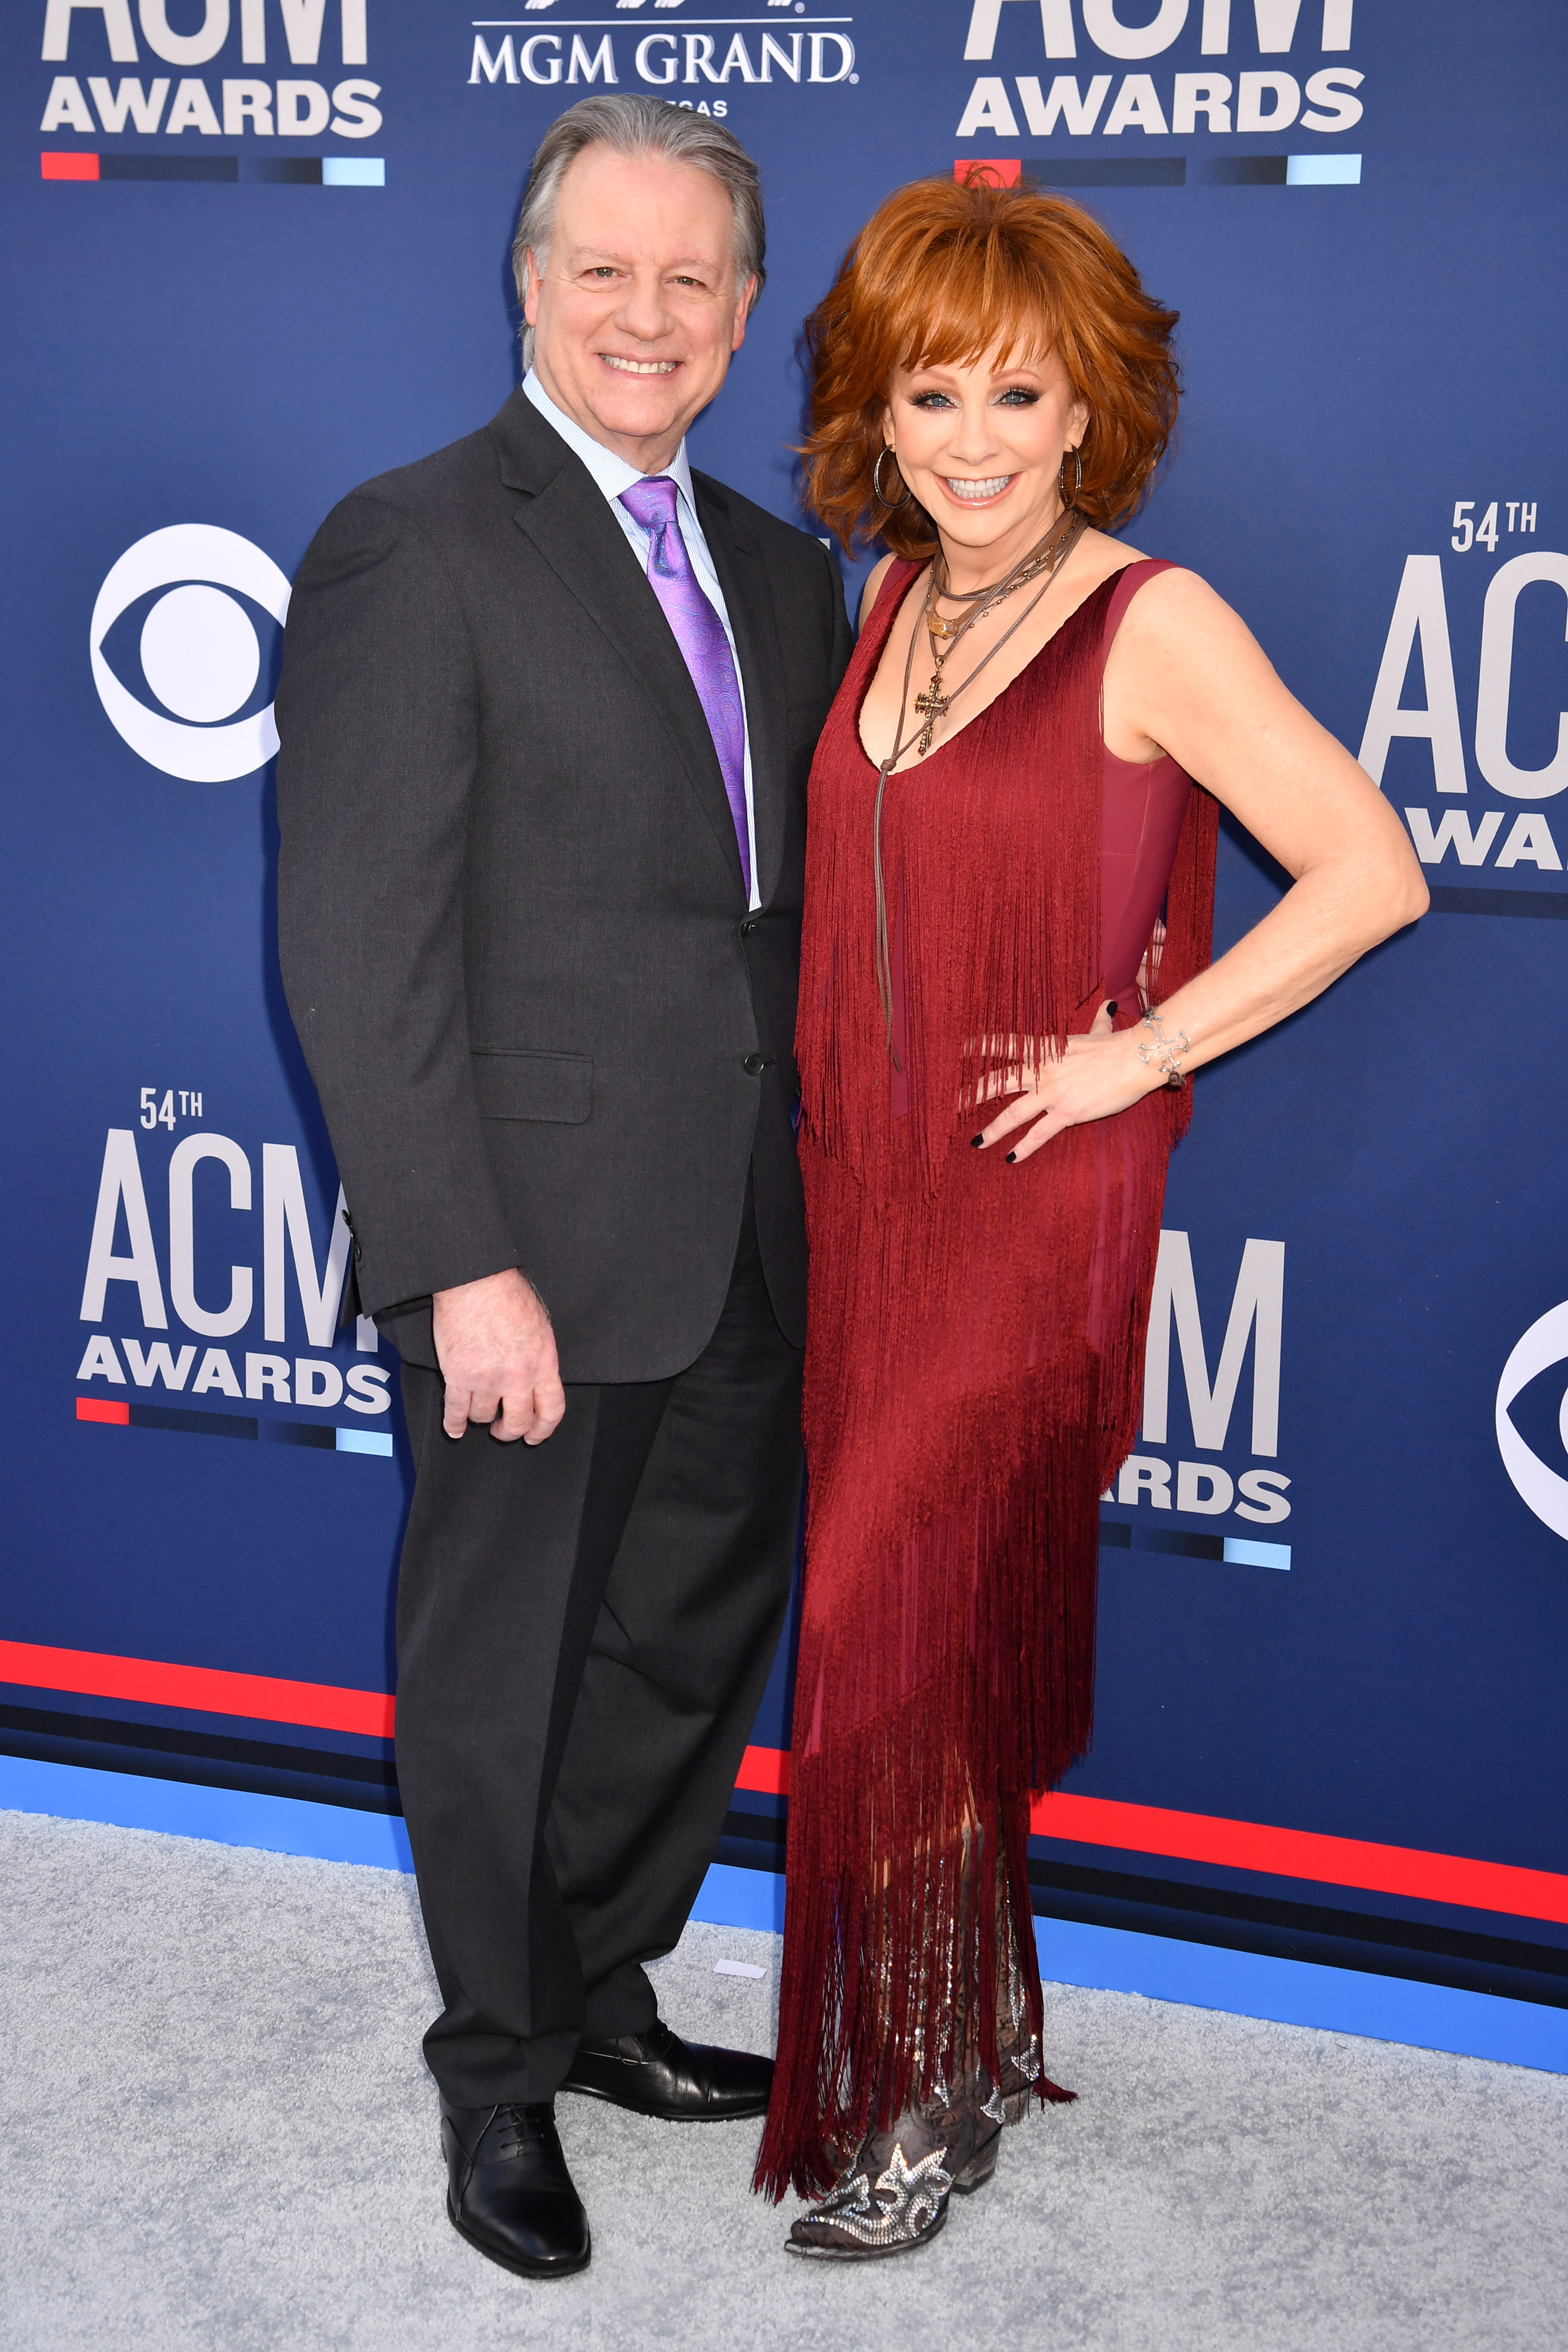 <p>Following a painful 2015 split from her husband of 26 years, manager Narvel Blackstock, country music queen Reba McEntire "was not looking" for love. "Not even interested," she told People magazine in April 2019. But out of the blue, she found it where she least expected it: Wyoming. Reba went on a vacation tour of Jackson Hole, Wyoming, in August 2017, and that's when she met retired oil geologist-turned-wildlife photographer Anthony "Skeeter" Lasuzzo, a friend of her buddy Kix Brooks of country duo Brooks & Dunn. ("Skeeter's the brother of one of my oldest friend's wives," Kix later revealed on "The Blair Garner Show.") The widower showed Reba's group the best spots for animal sightings and "we just had the best time," Reba told People. "And so two nights later, we all went out to dinner, and he bought my dinner." When she returned to Wyoming two months later, Skeeter asked her out. "I was there almost a week and we spent every day together," she said. In May 2019, however, they decided to go their separate ways, though have remained friends.</p>